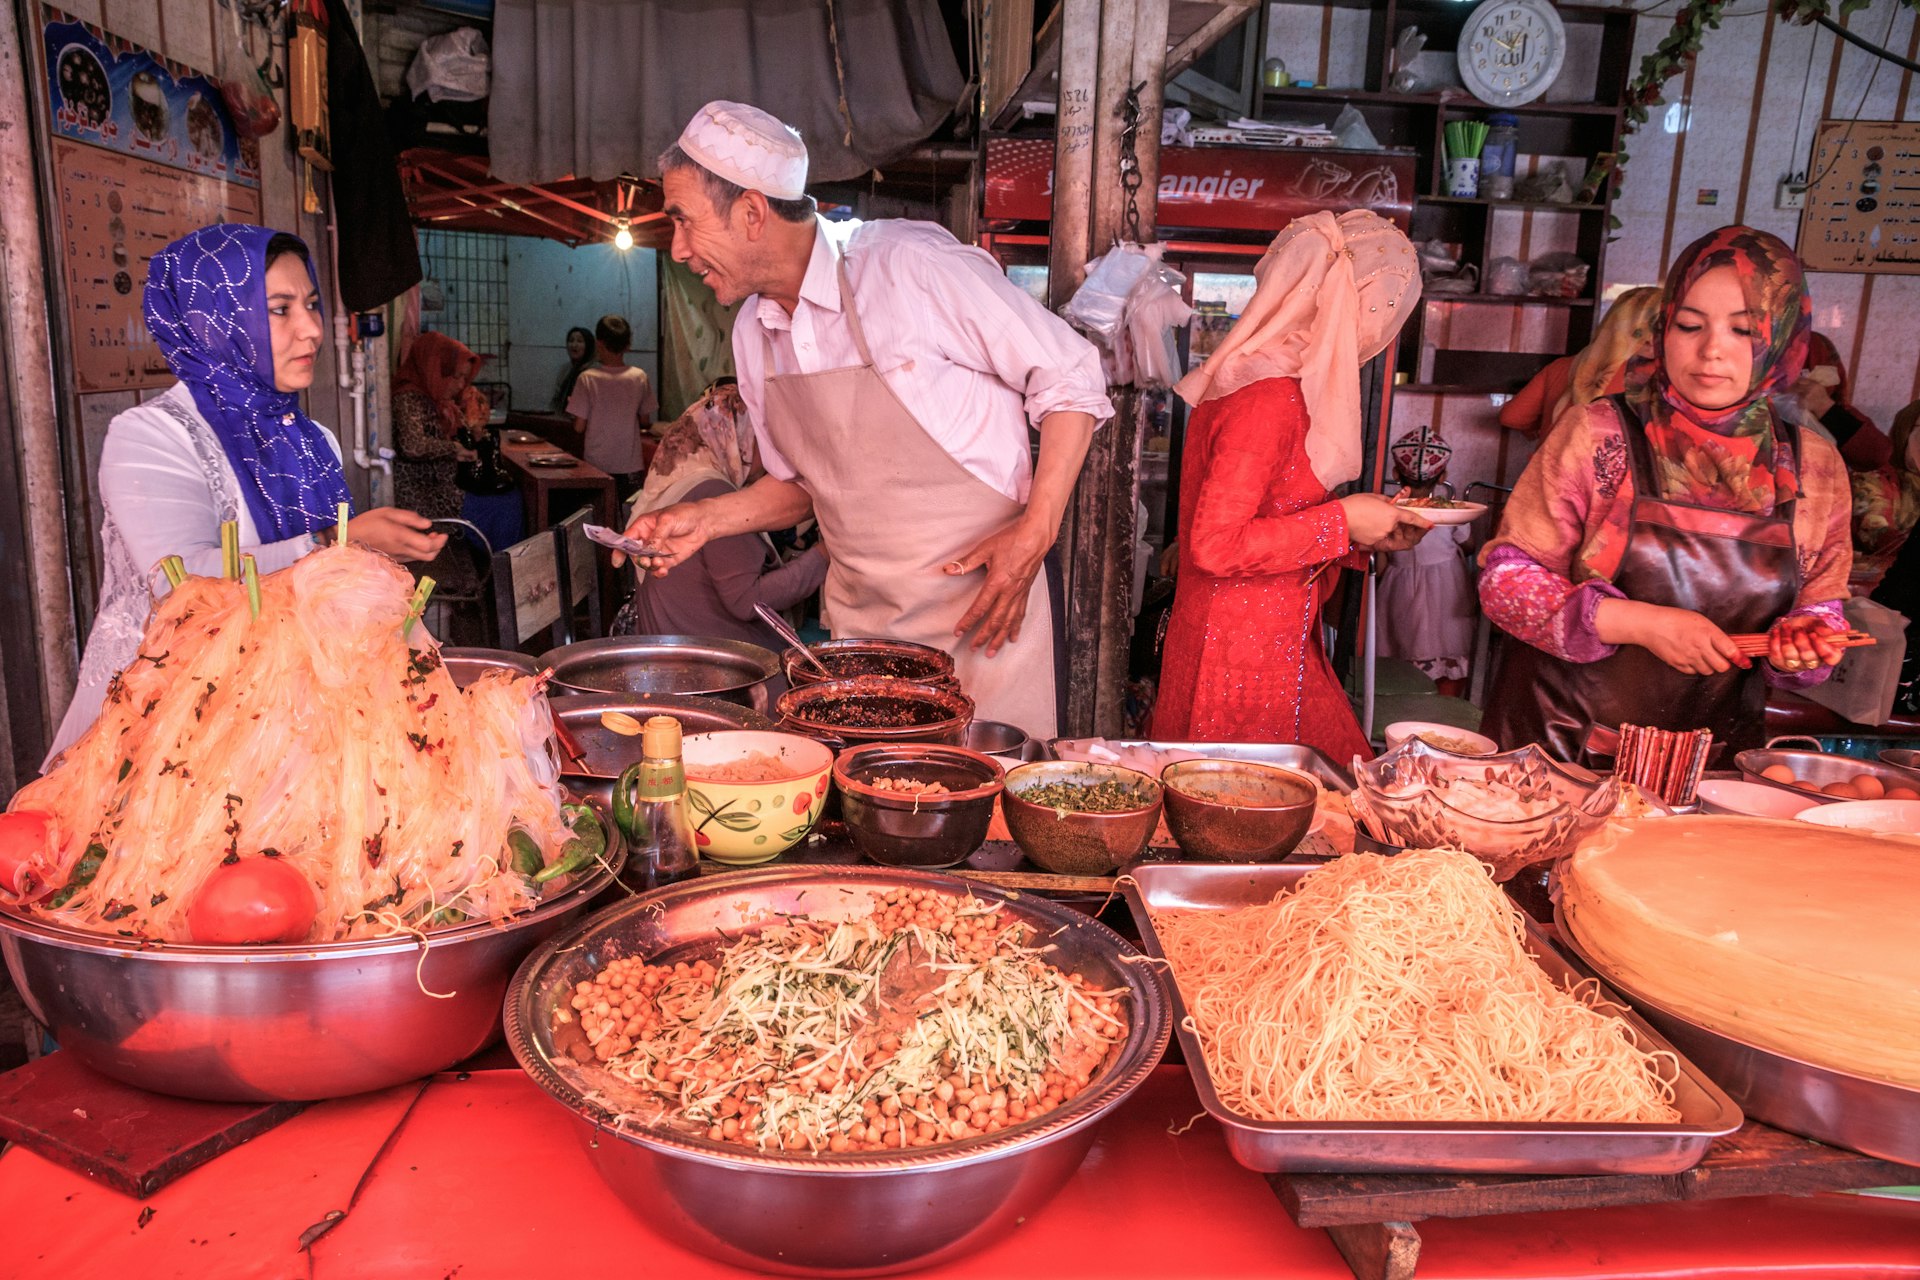 Vendors sell traditional foods at Kashgar's Grand Bazaar © Feng Wei Photography / Getty